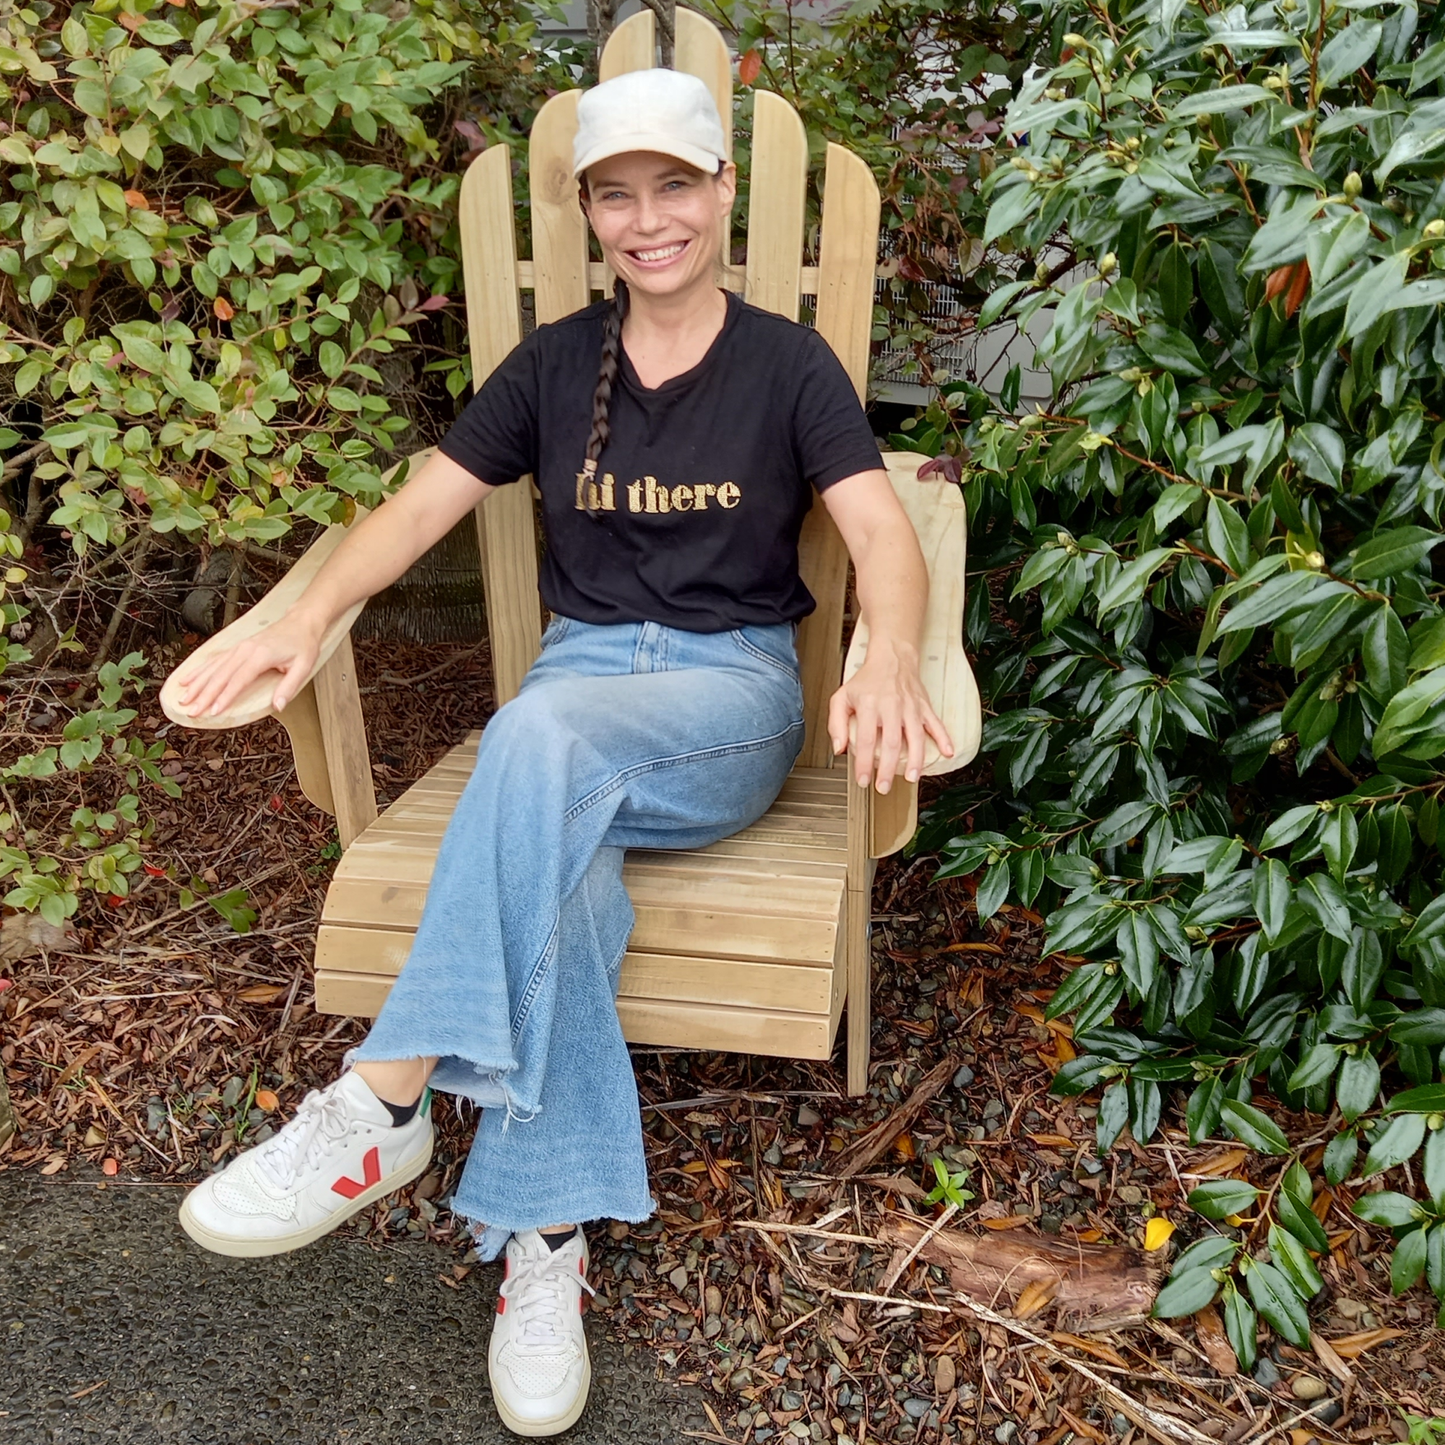 DIY plans to build a comfortable Adirondack chair with curved arms